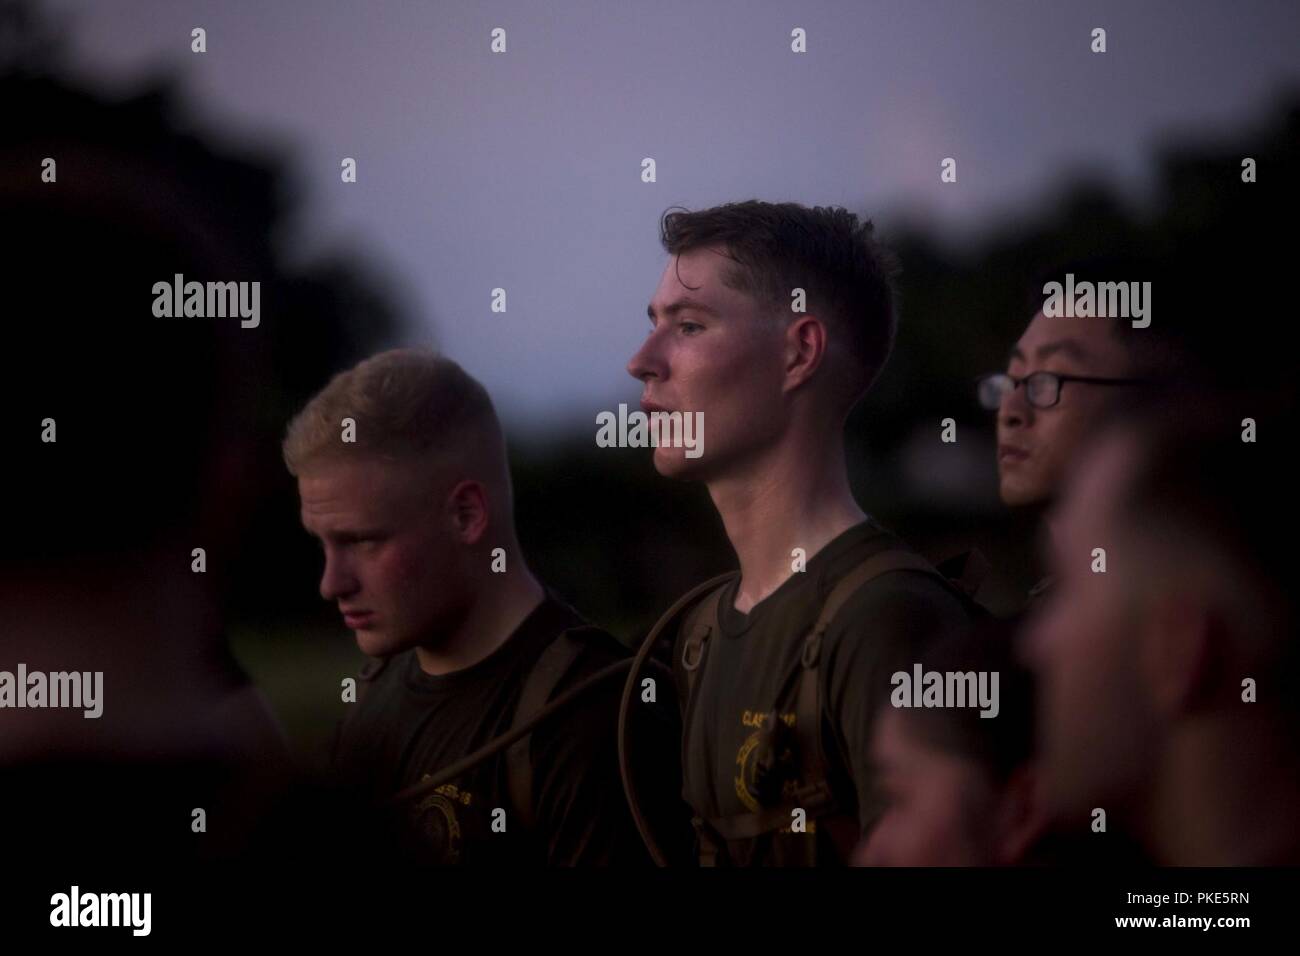 Cpl. William Baker, center, an ammunition technician with Headquarters Company, Headquarters Regiment, 3rd Marine Logistics Group, listens as Master Sgt. Eric C. Hernandez speaks to the Marines in Corporals Course class 576-18 July 25, 2018 at Hacksaw Ridge, Okinawa, Japan. Hernandez, a guest speaker for the class, is the operations chief of Communications Company, HQ Reg., 3rd MLG. Baker is a native of Bowling Green, Kentucky. Hernandez is a native of Forest Hills, New York. Stock Photo